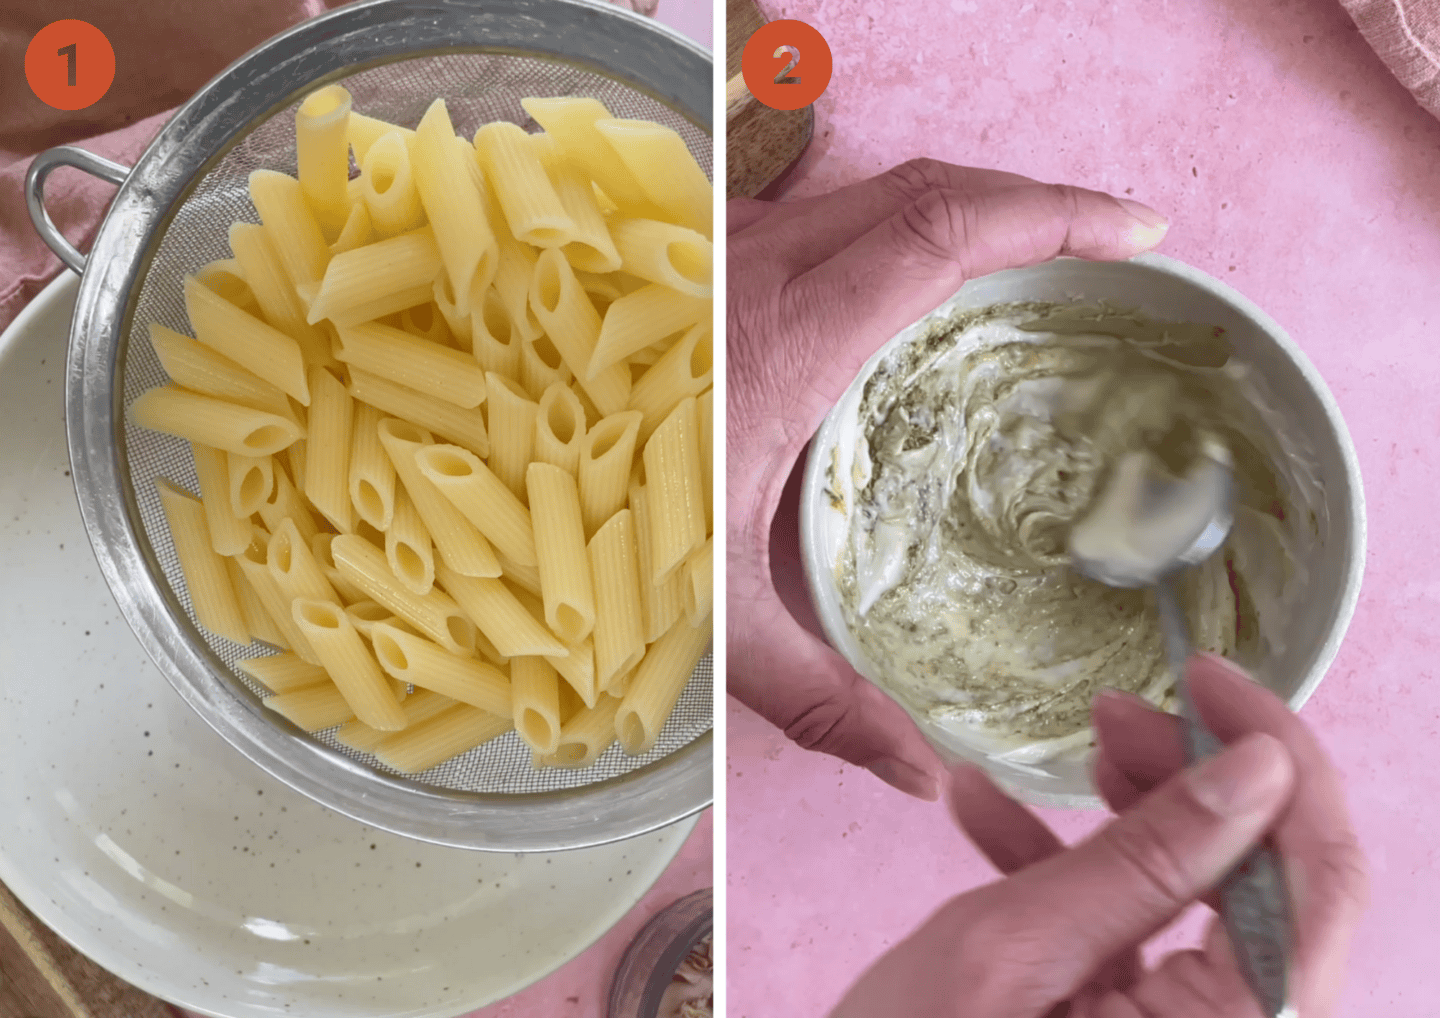 (left) Cook the gluten free pasta and (right) mixing the pesto mayo.